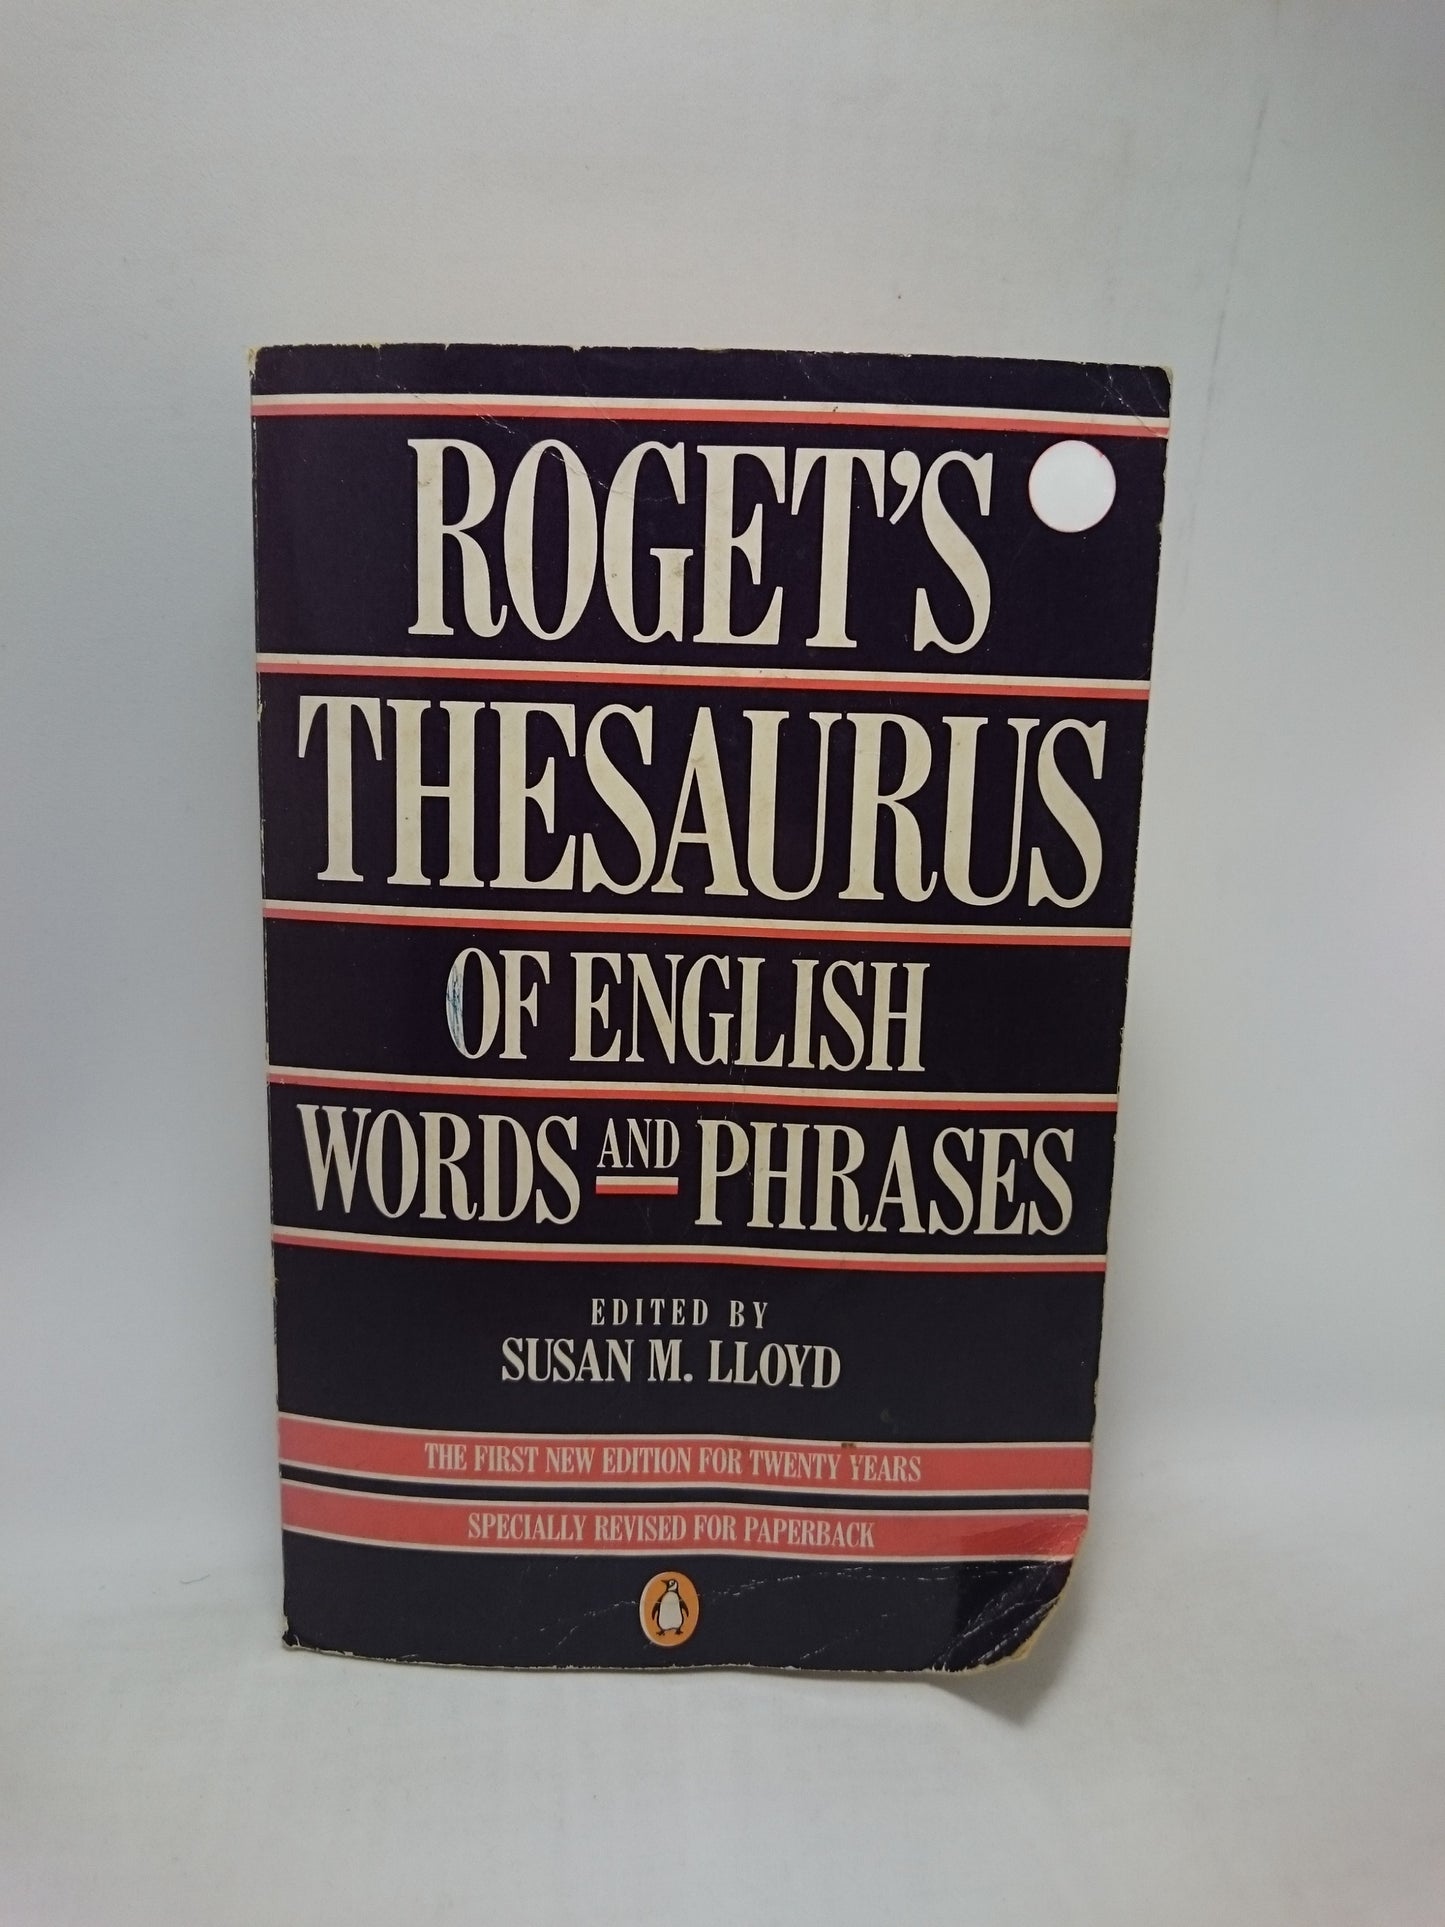 Roget's Thesaurus Of English Words And Phrases